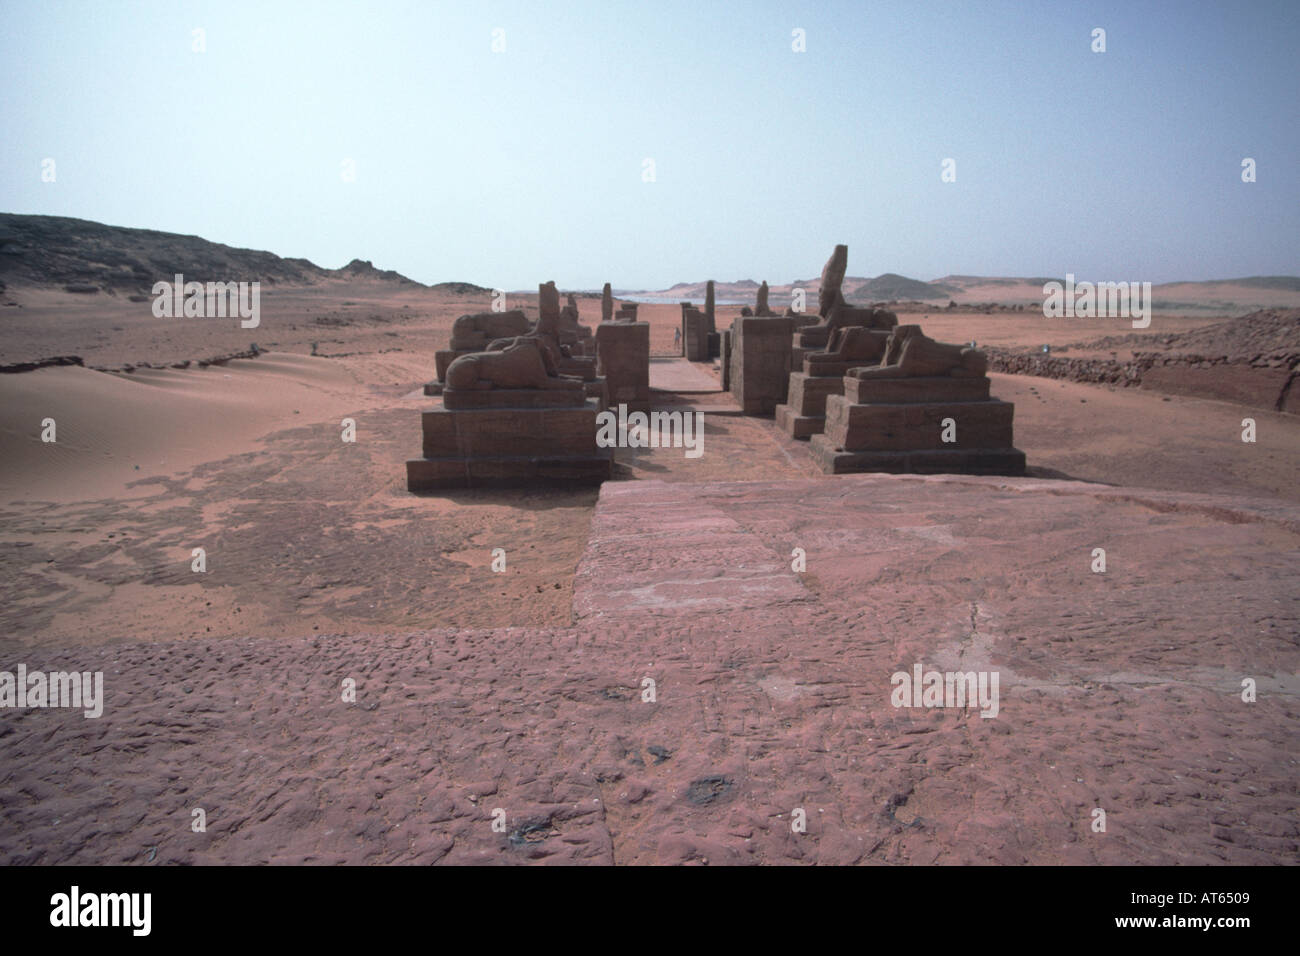 The avenue of sphinxes and the temple. Wadi al-Sebua, New Sebua, Upper Egypt, Egypt. The temple was built by Ramsess II and was moved from the rising waters of Lake Nasser in the 1970s. Stock Photo